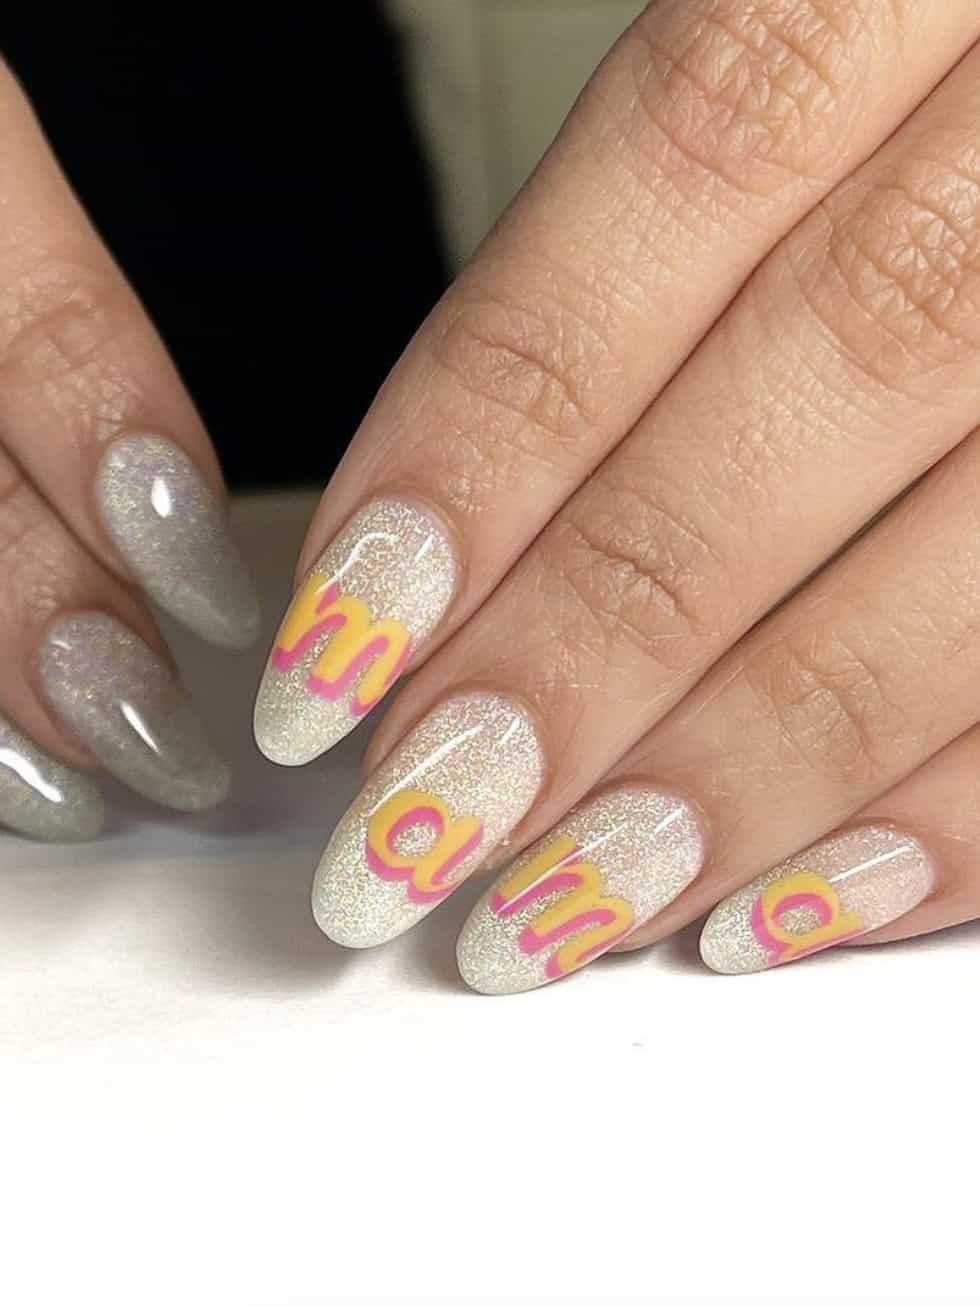 A hand with glittering almond nails with pink and yellow text spelling mama across each nail